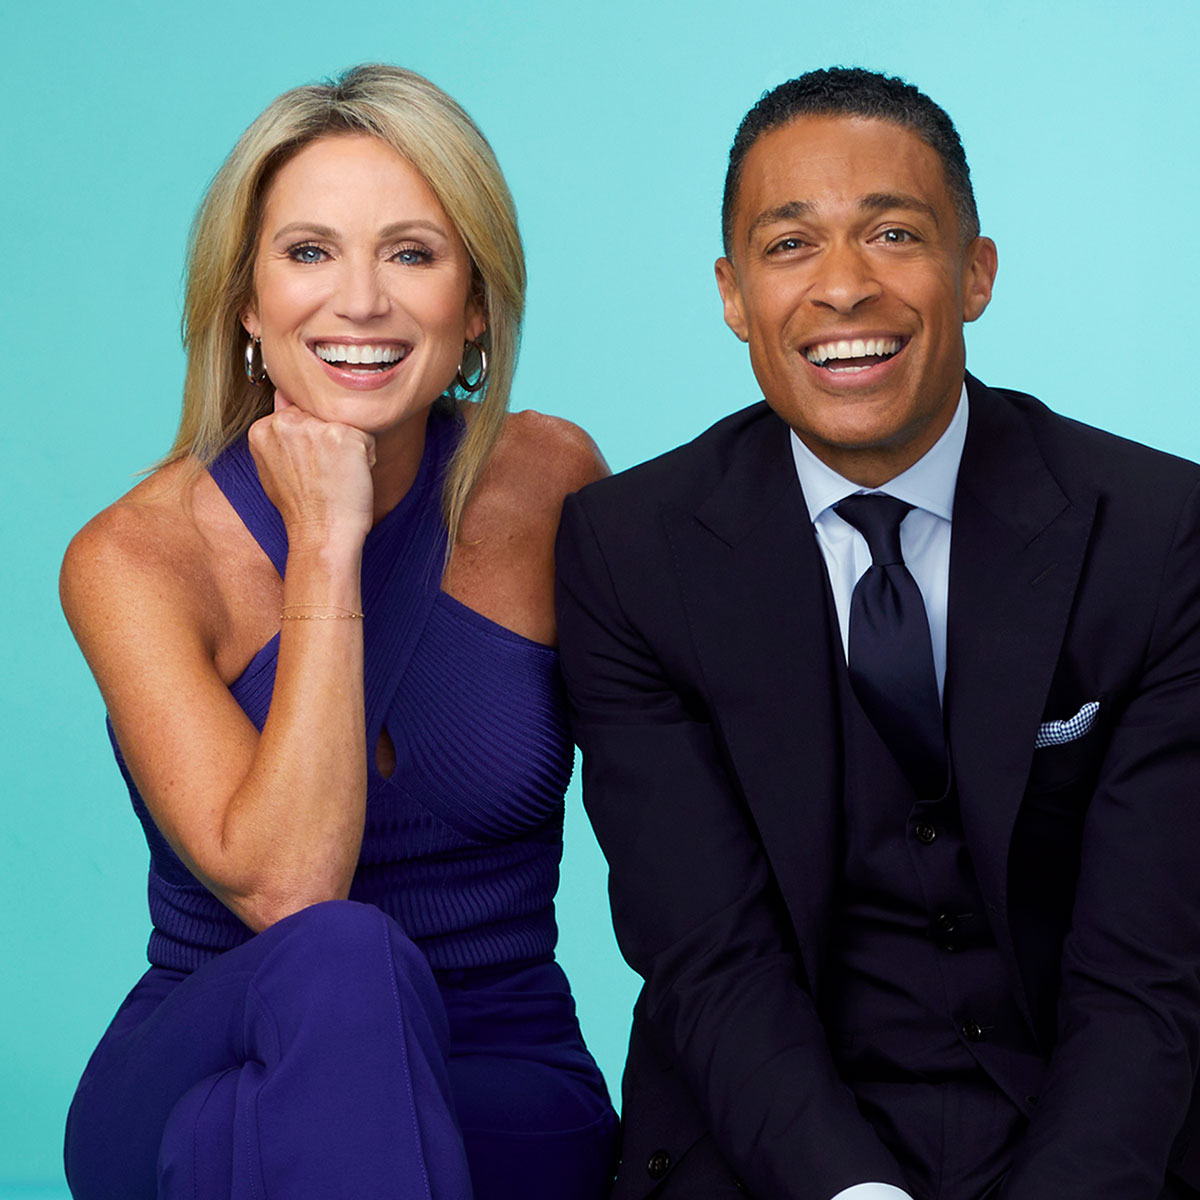 Amy Robach And T.J. Holmes Prove They Are 'Very Much Together' In